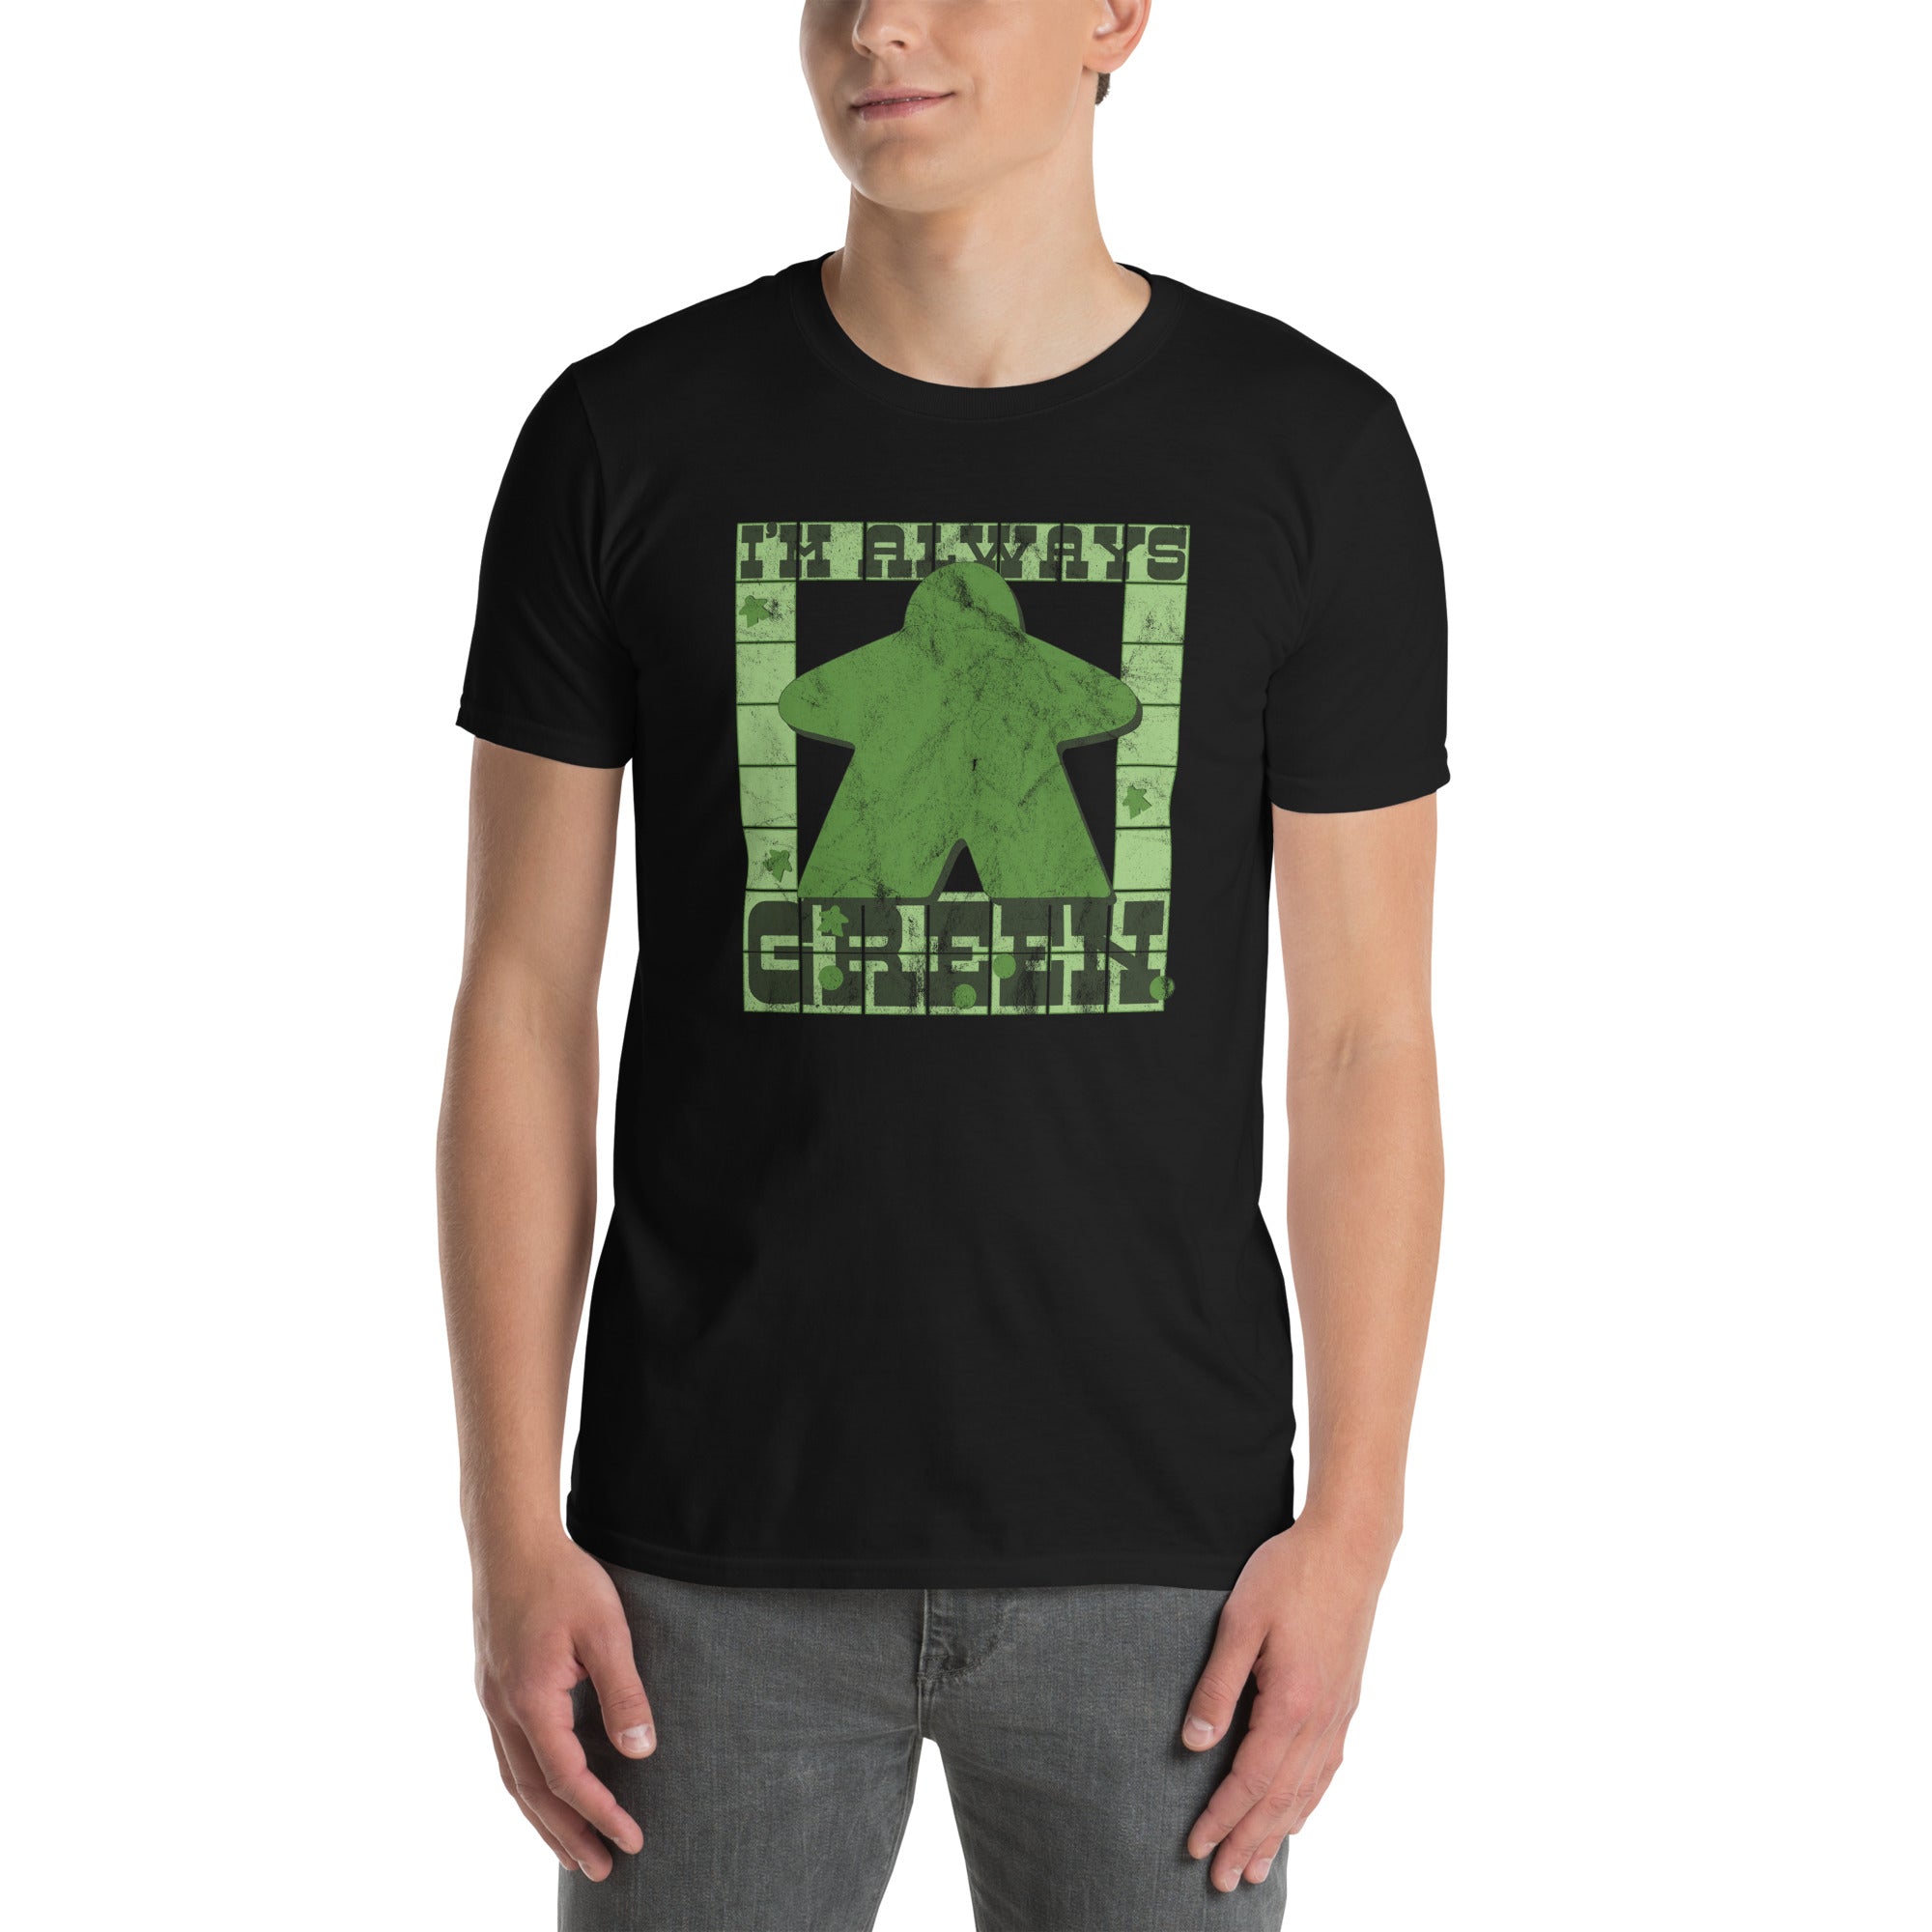 I'm Always Green Meeple Board Game Shirt on a Model